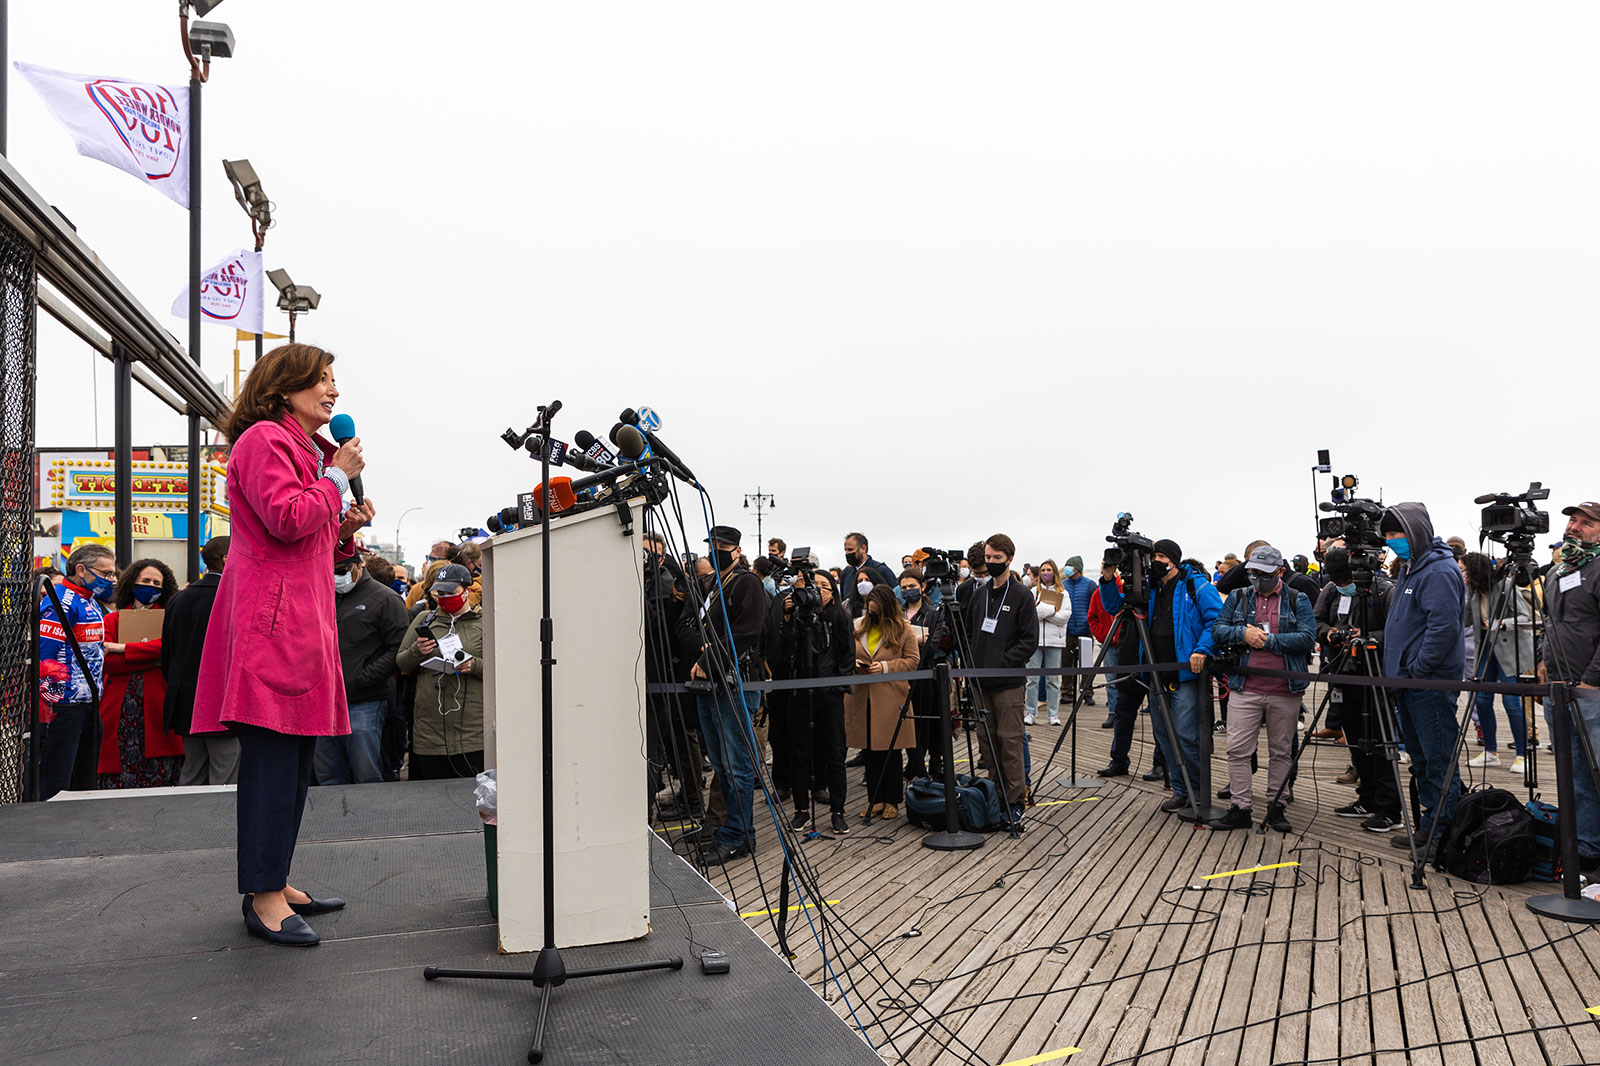 New York Lt. Gov. Kathy Hochul speaks at a news conference in Coney Island, New York, on Friday, April 9.